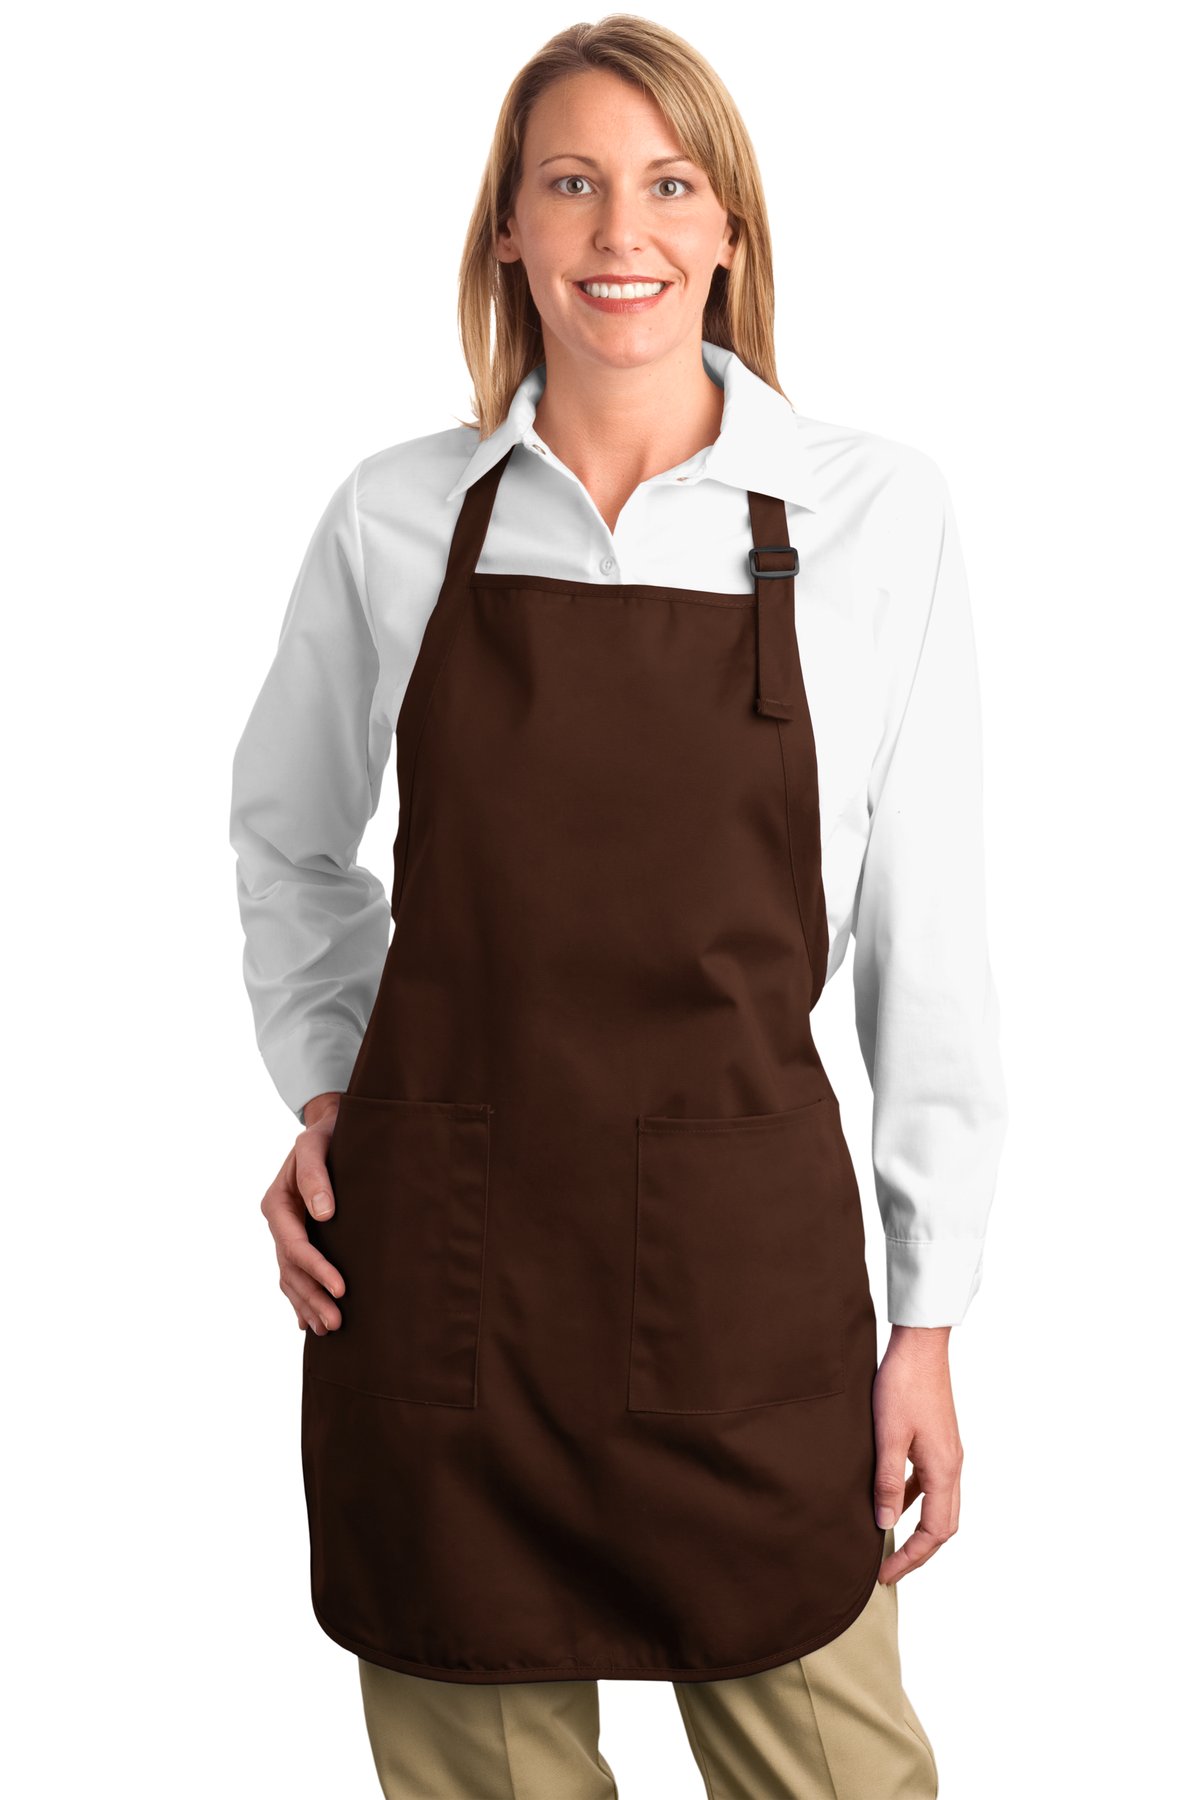 Port Authority A510 Medium Length Apron with Pouch Pockets 